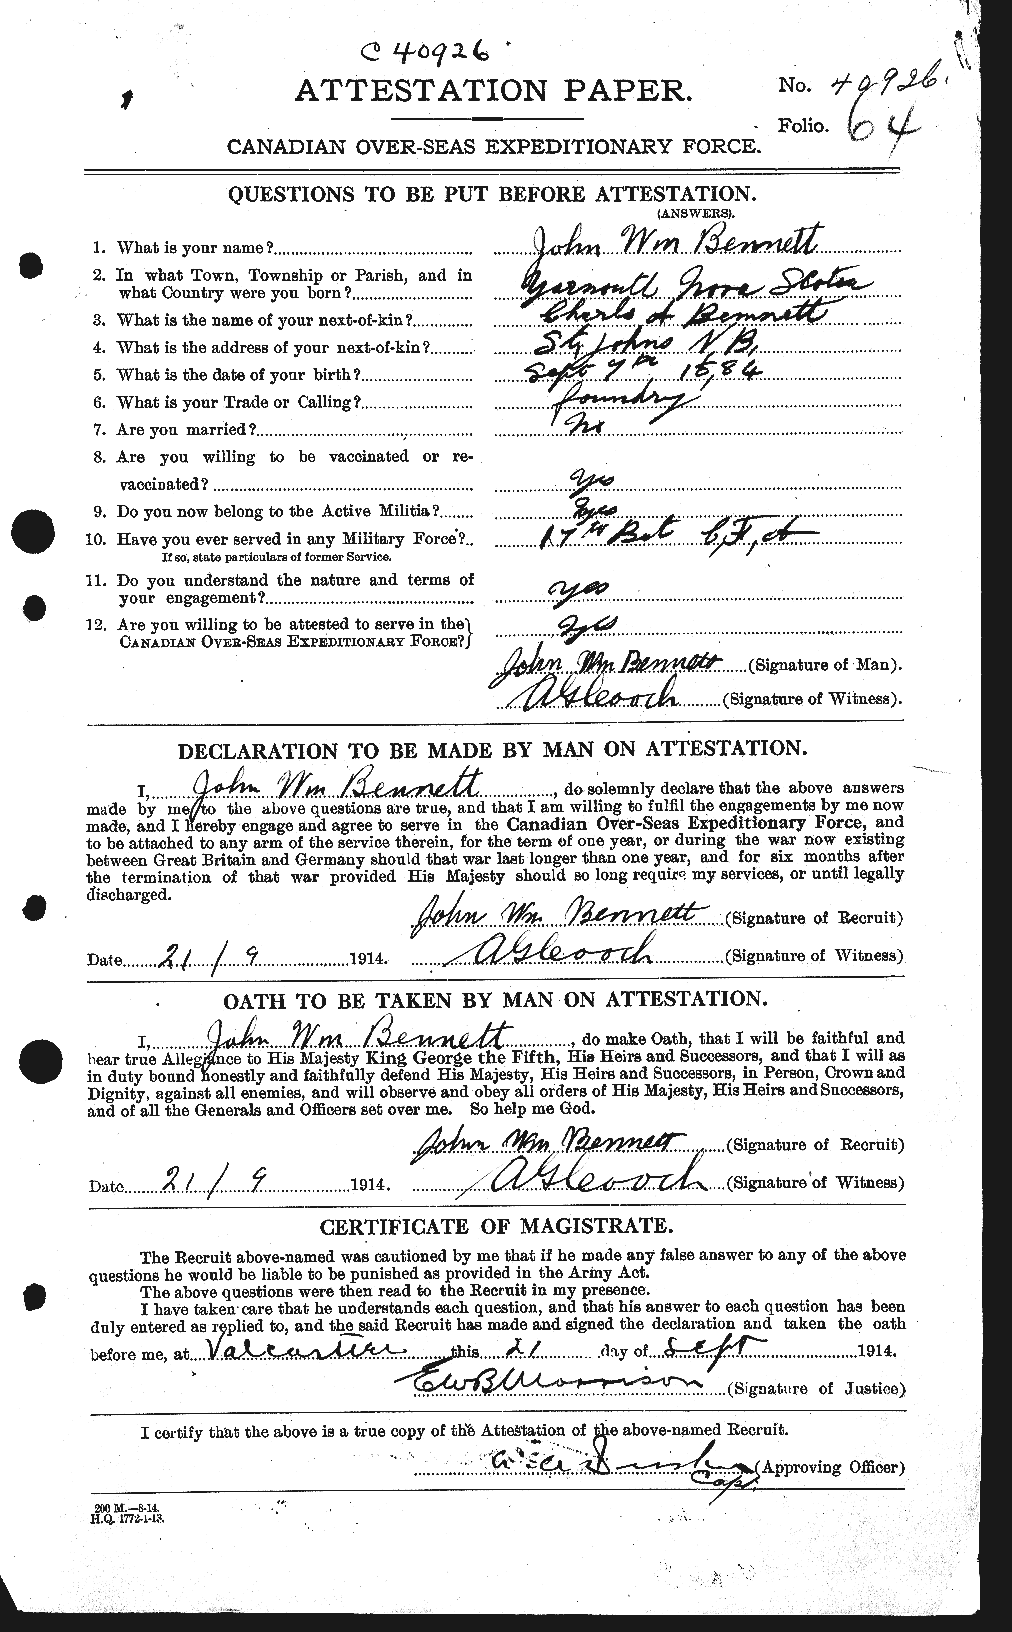 Personnel Records of the First World War - CEF 238626a